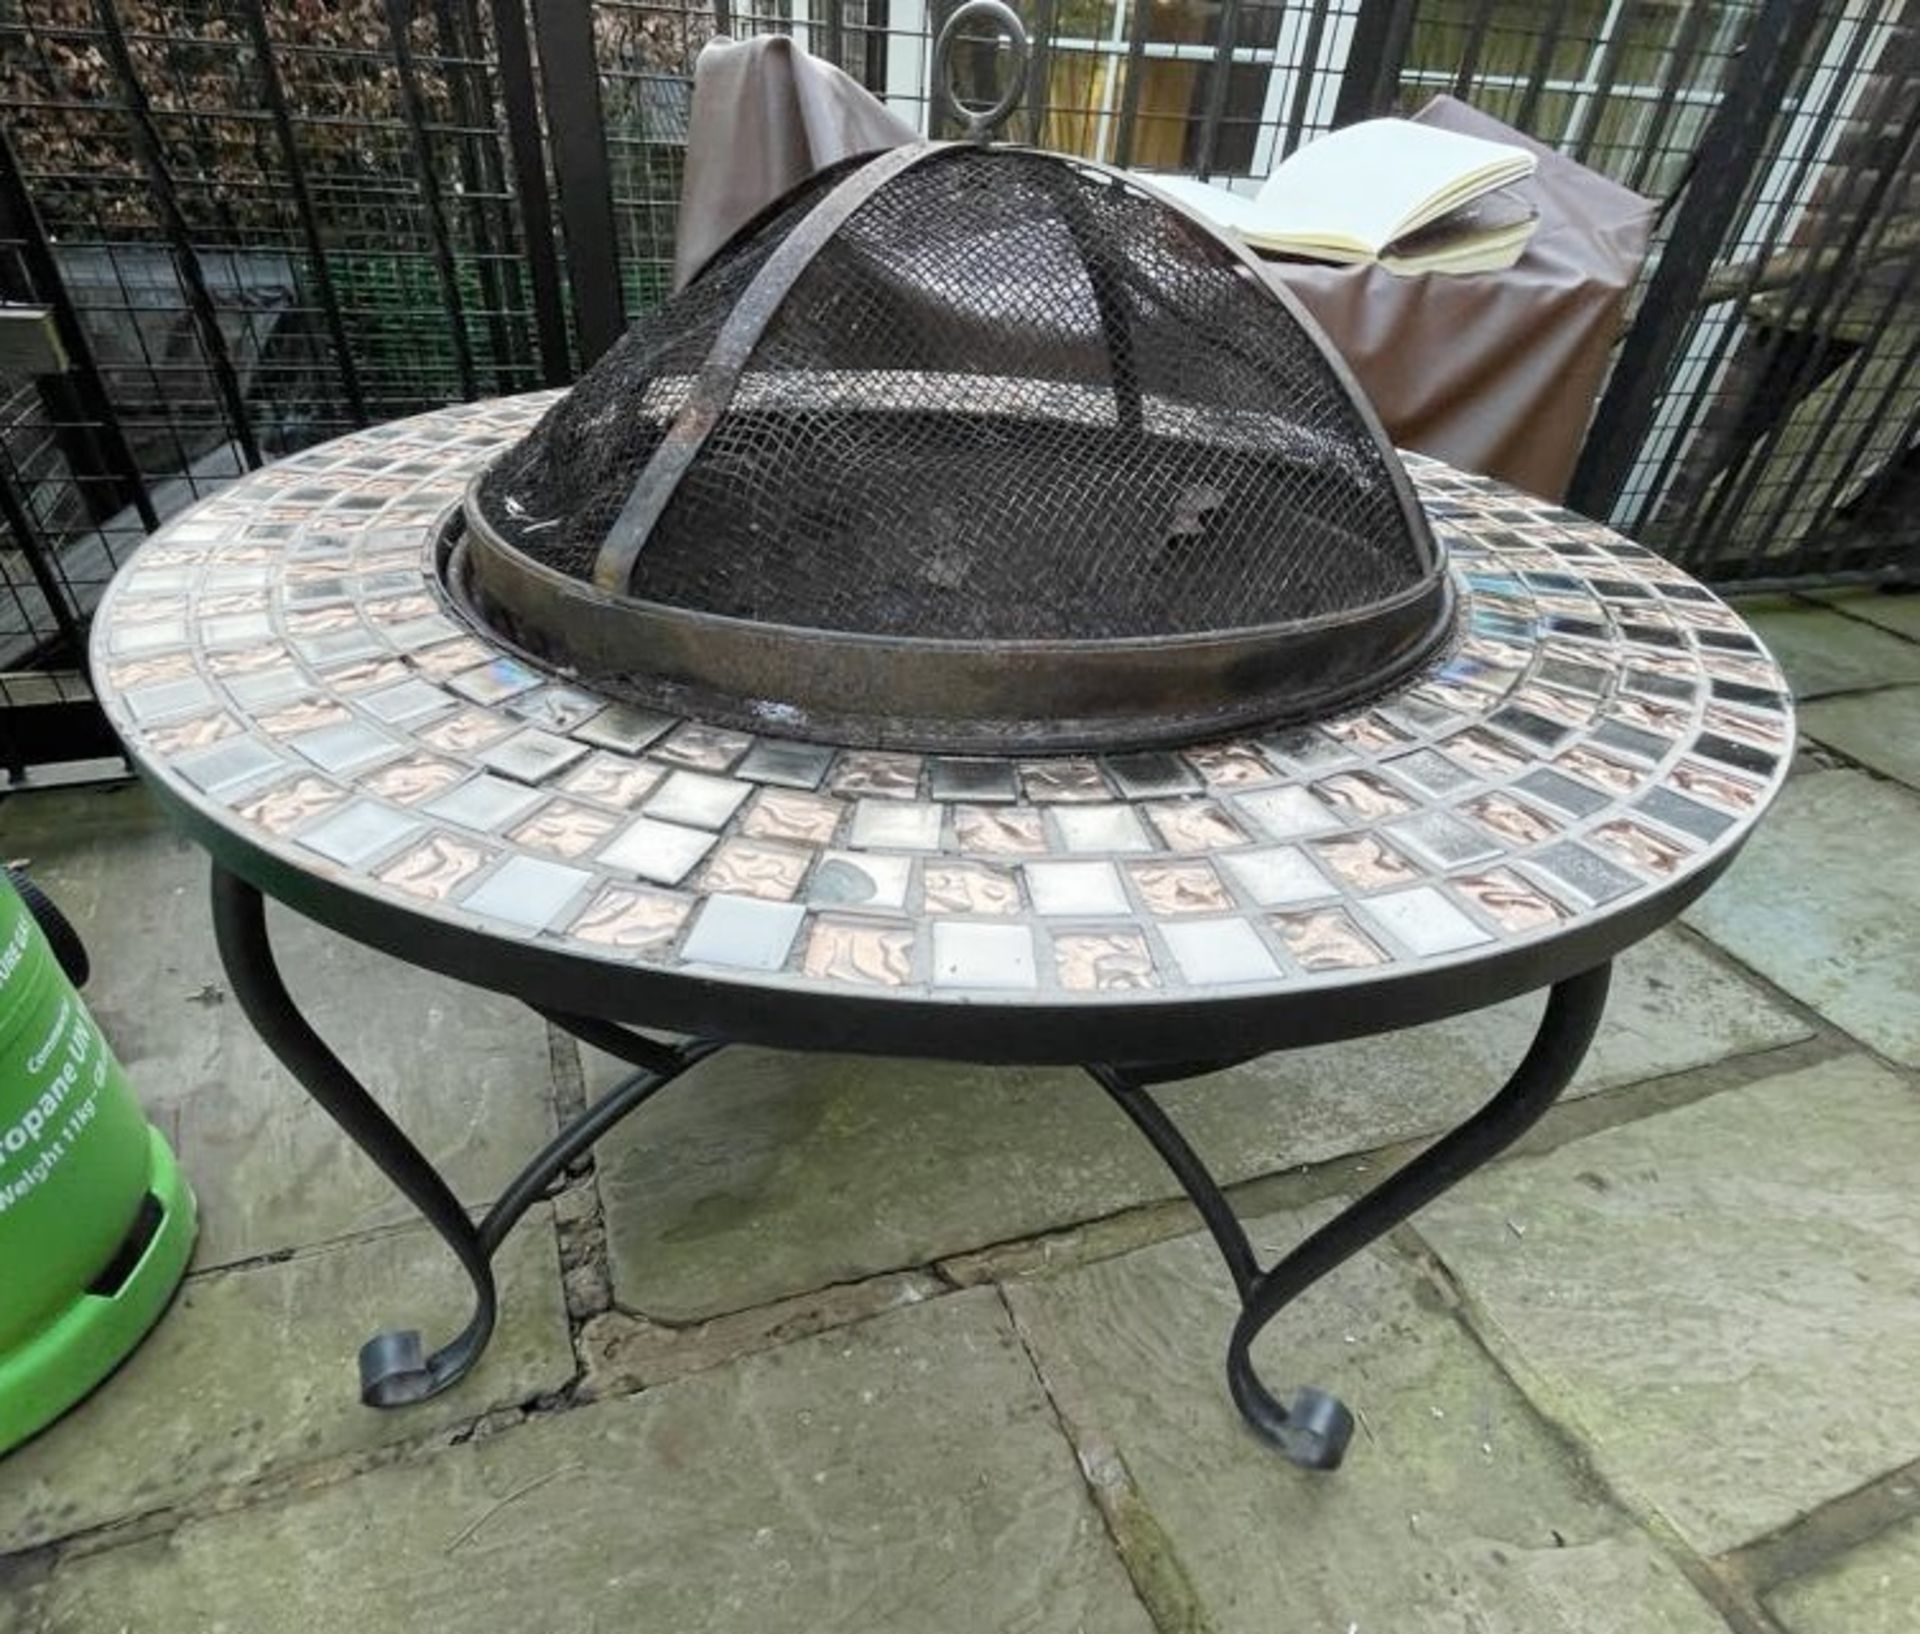 1 x Fire Pit With Tiled Surround - Preowned, From An Exclusive Property - Dimensions: Height H49cm /